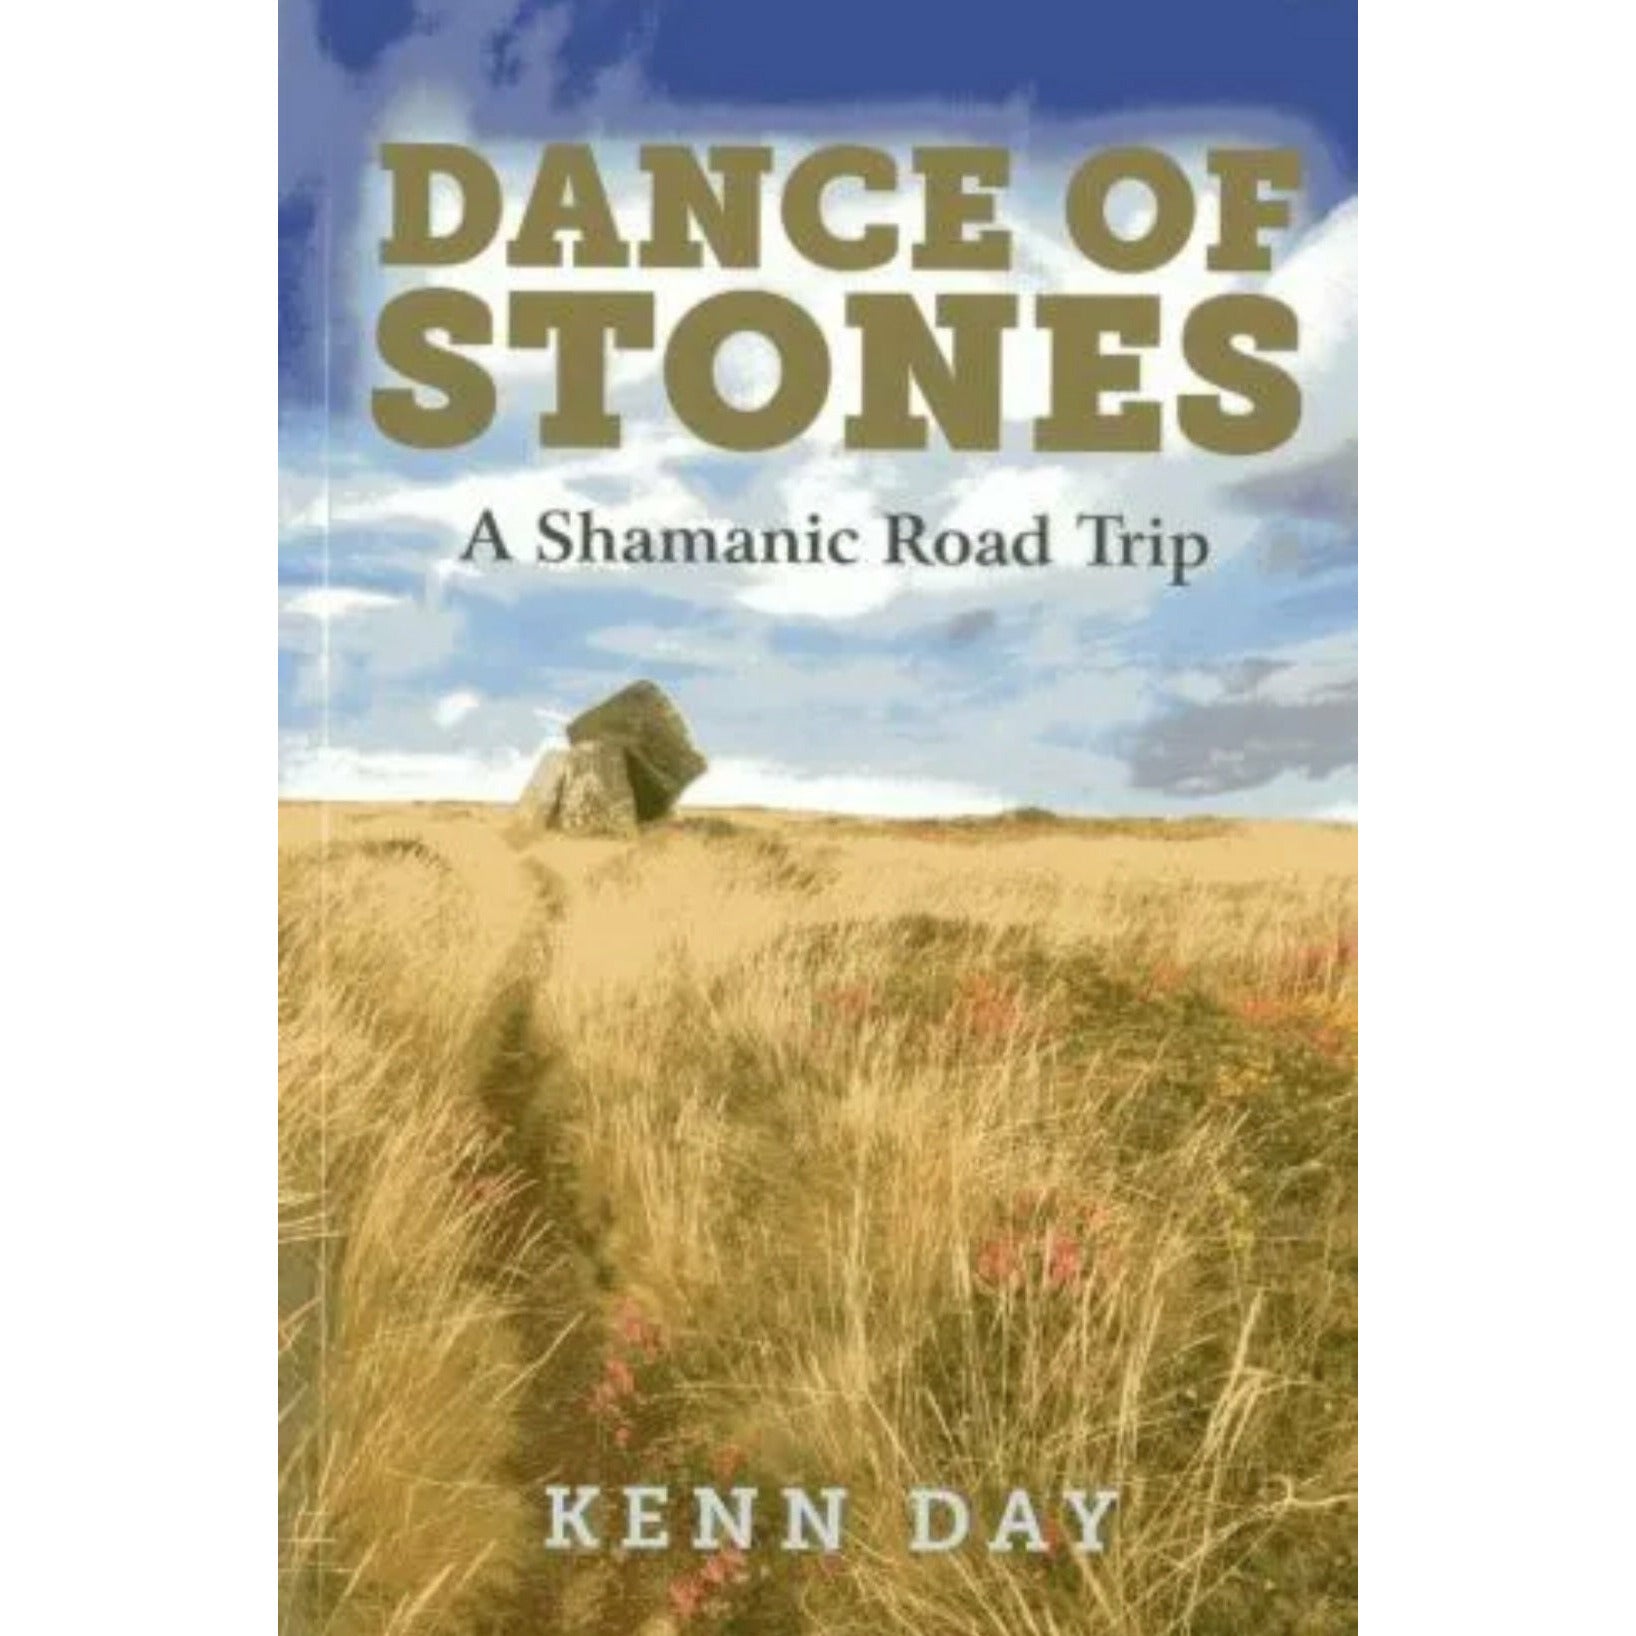 DANCE OF STONES A SHAMANIC ROAD TRIP